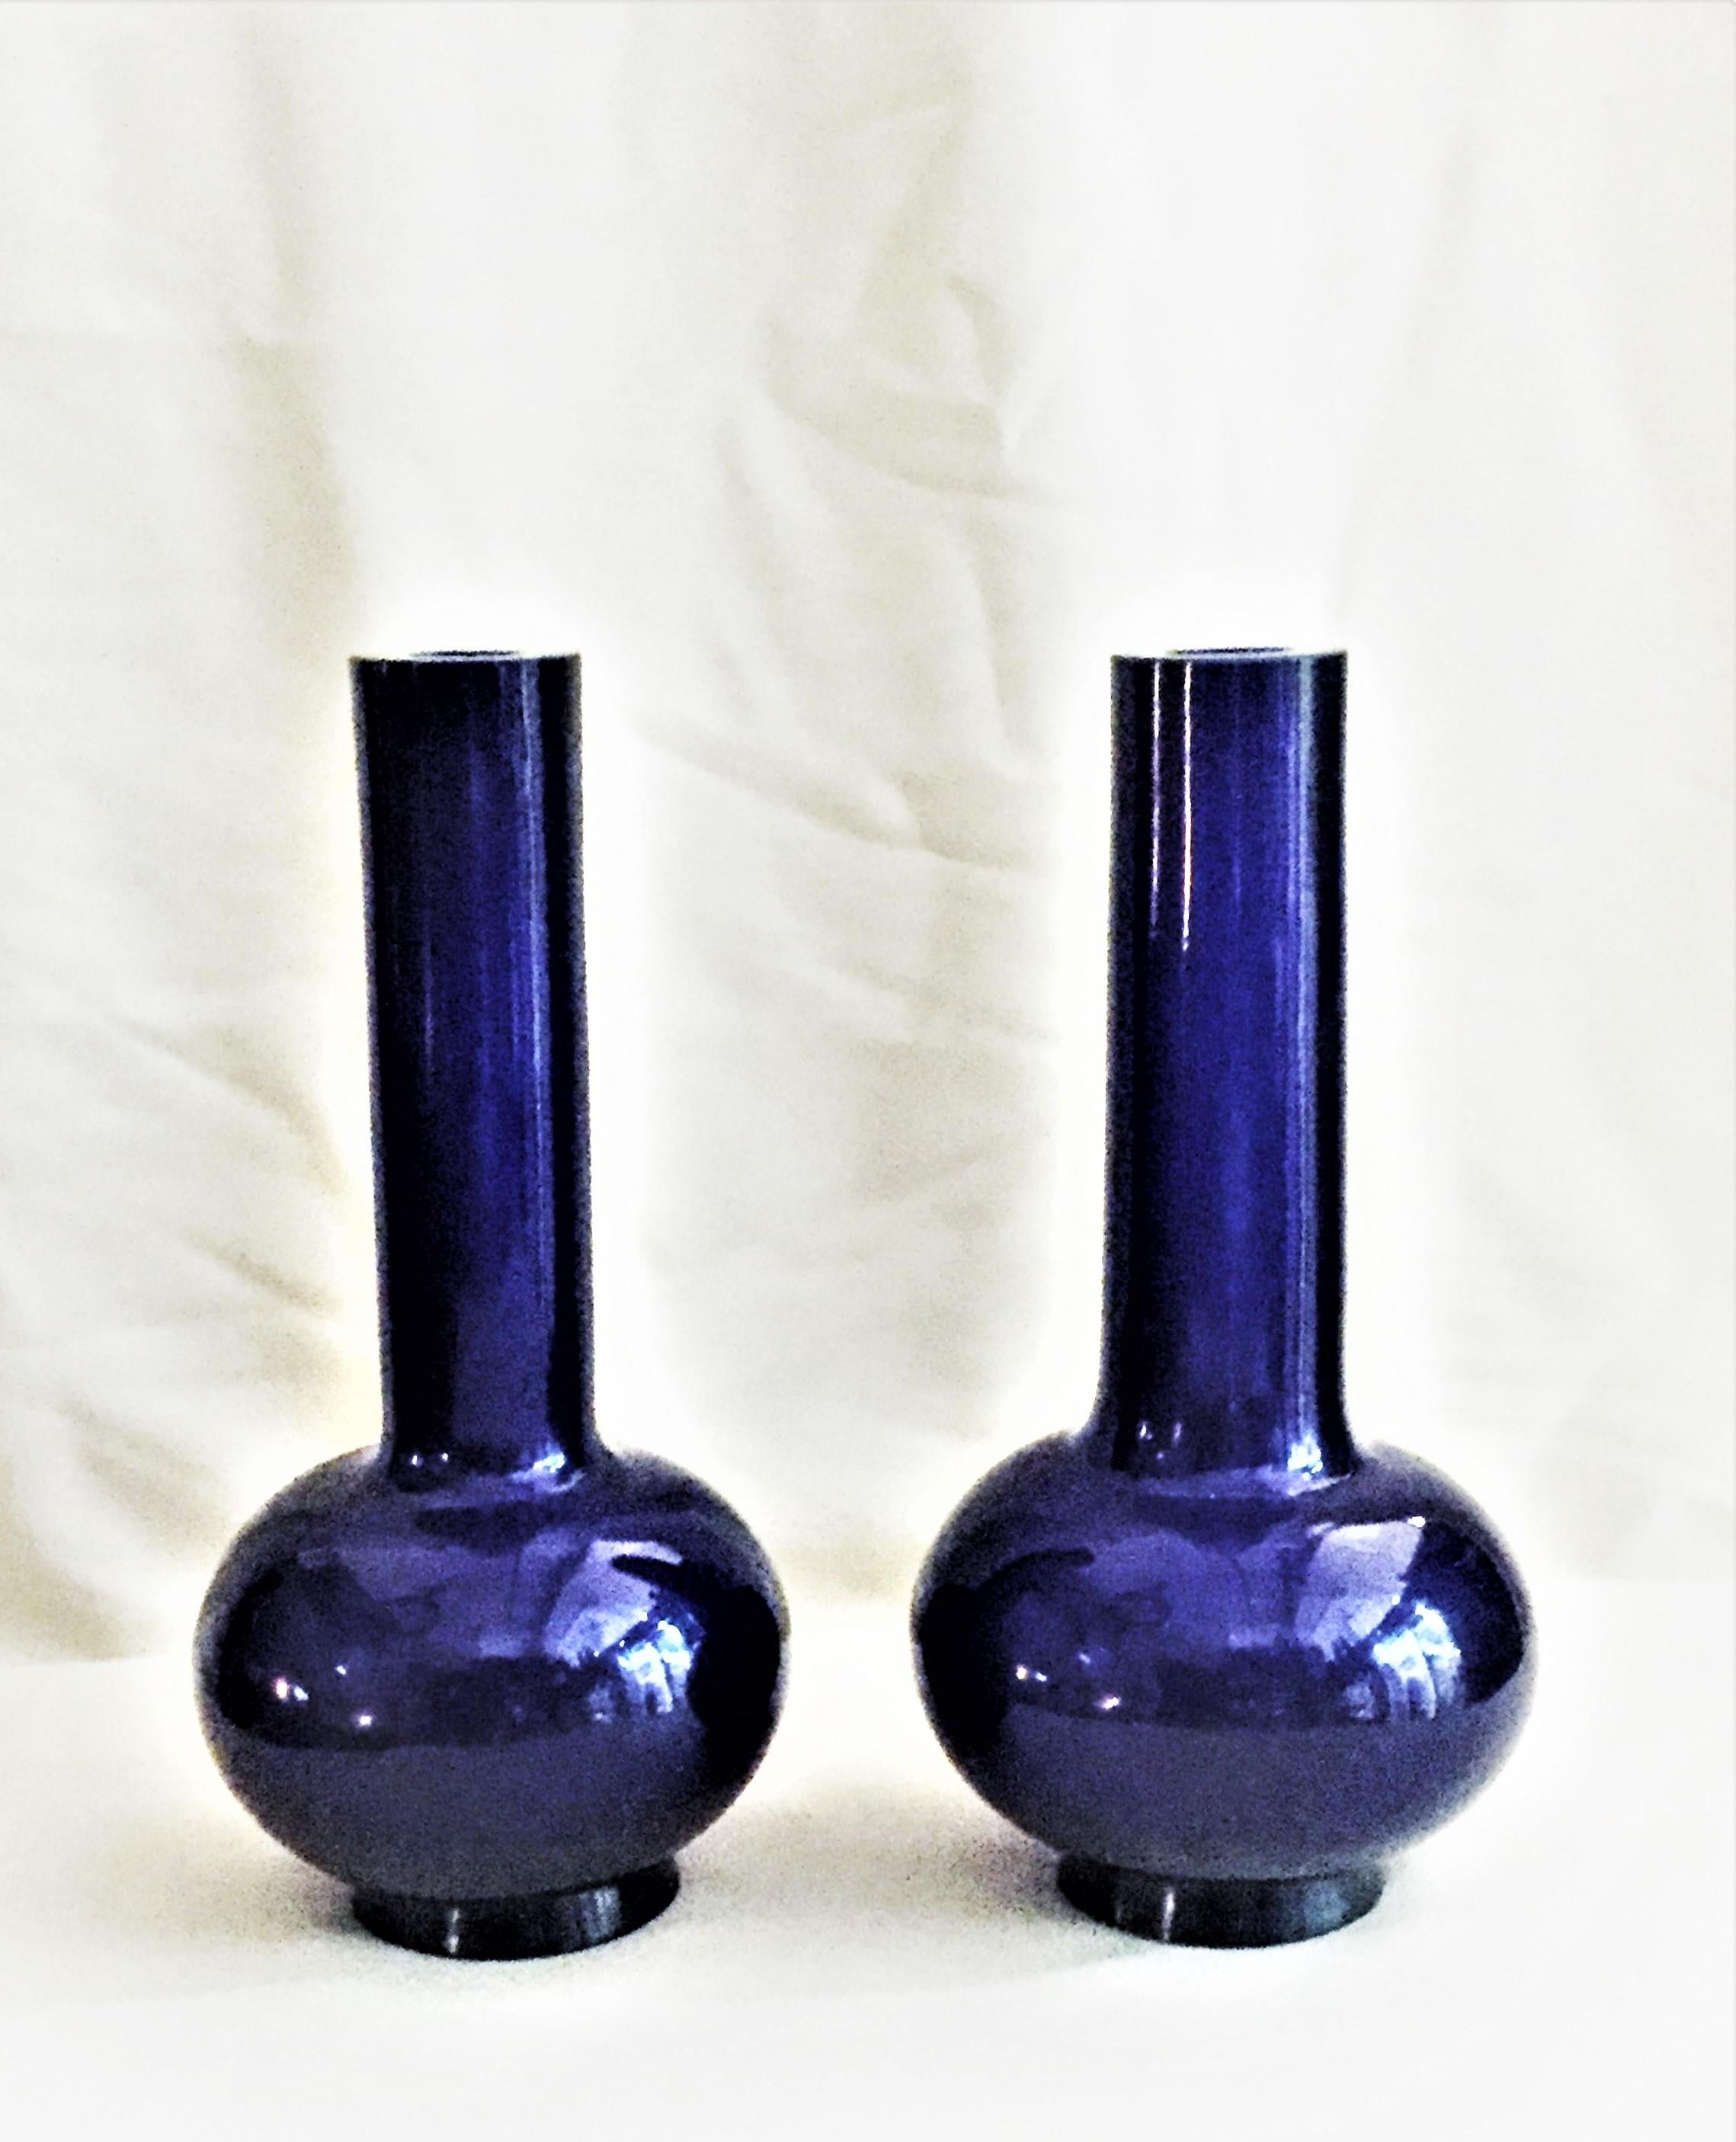 This striking pair of Peking glass vases have a straight cylindrical neck and globular body. The smoothly curved classical form creates a dramatic silhouette accentuated by the deep, translucent cobalt-blue color. 

Peking glass was an art form